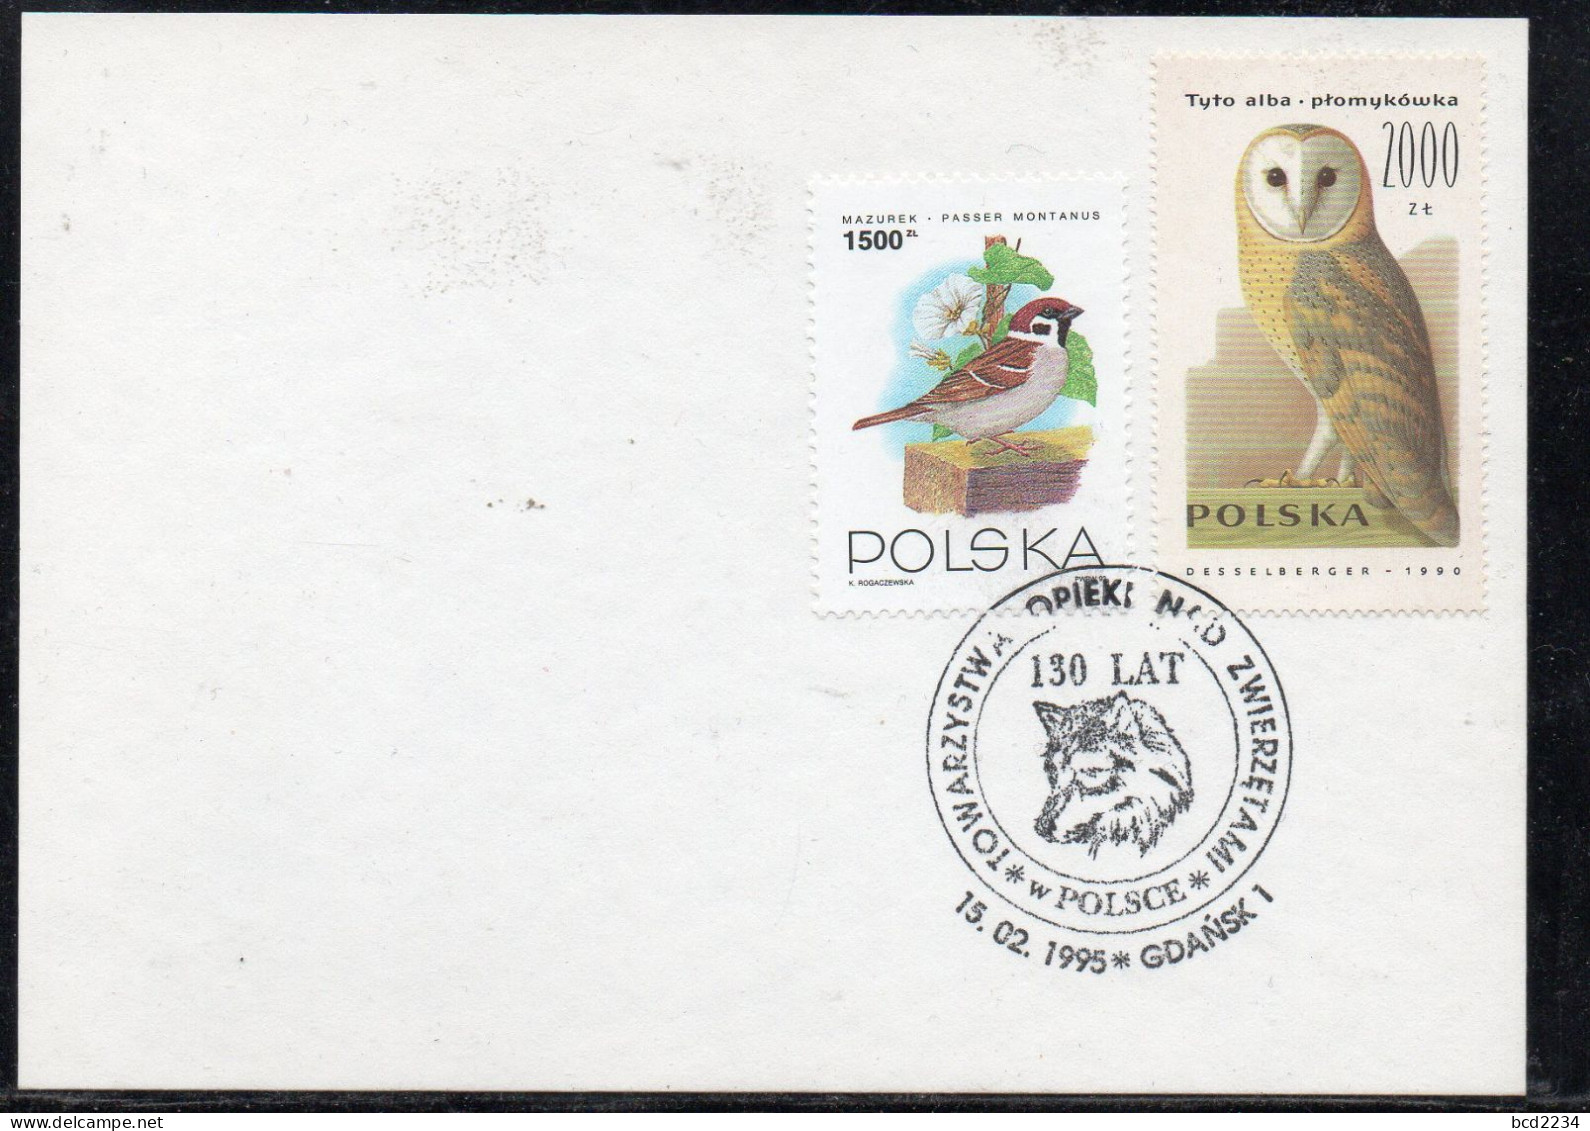 POLAND 1995 130 YEARS OF POLISH ASSOCIATION FOR THE PROTECTION OF ANIMALS GDANSK SPECIAL CANCEL ON CARD WOLF - Dogs